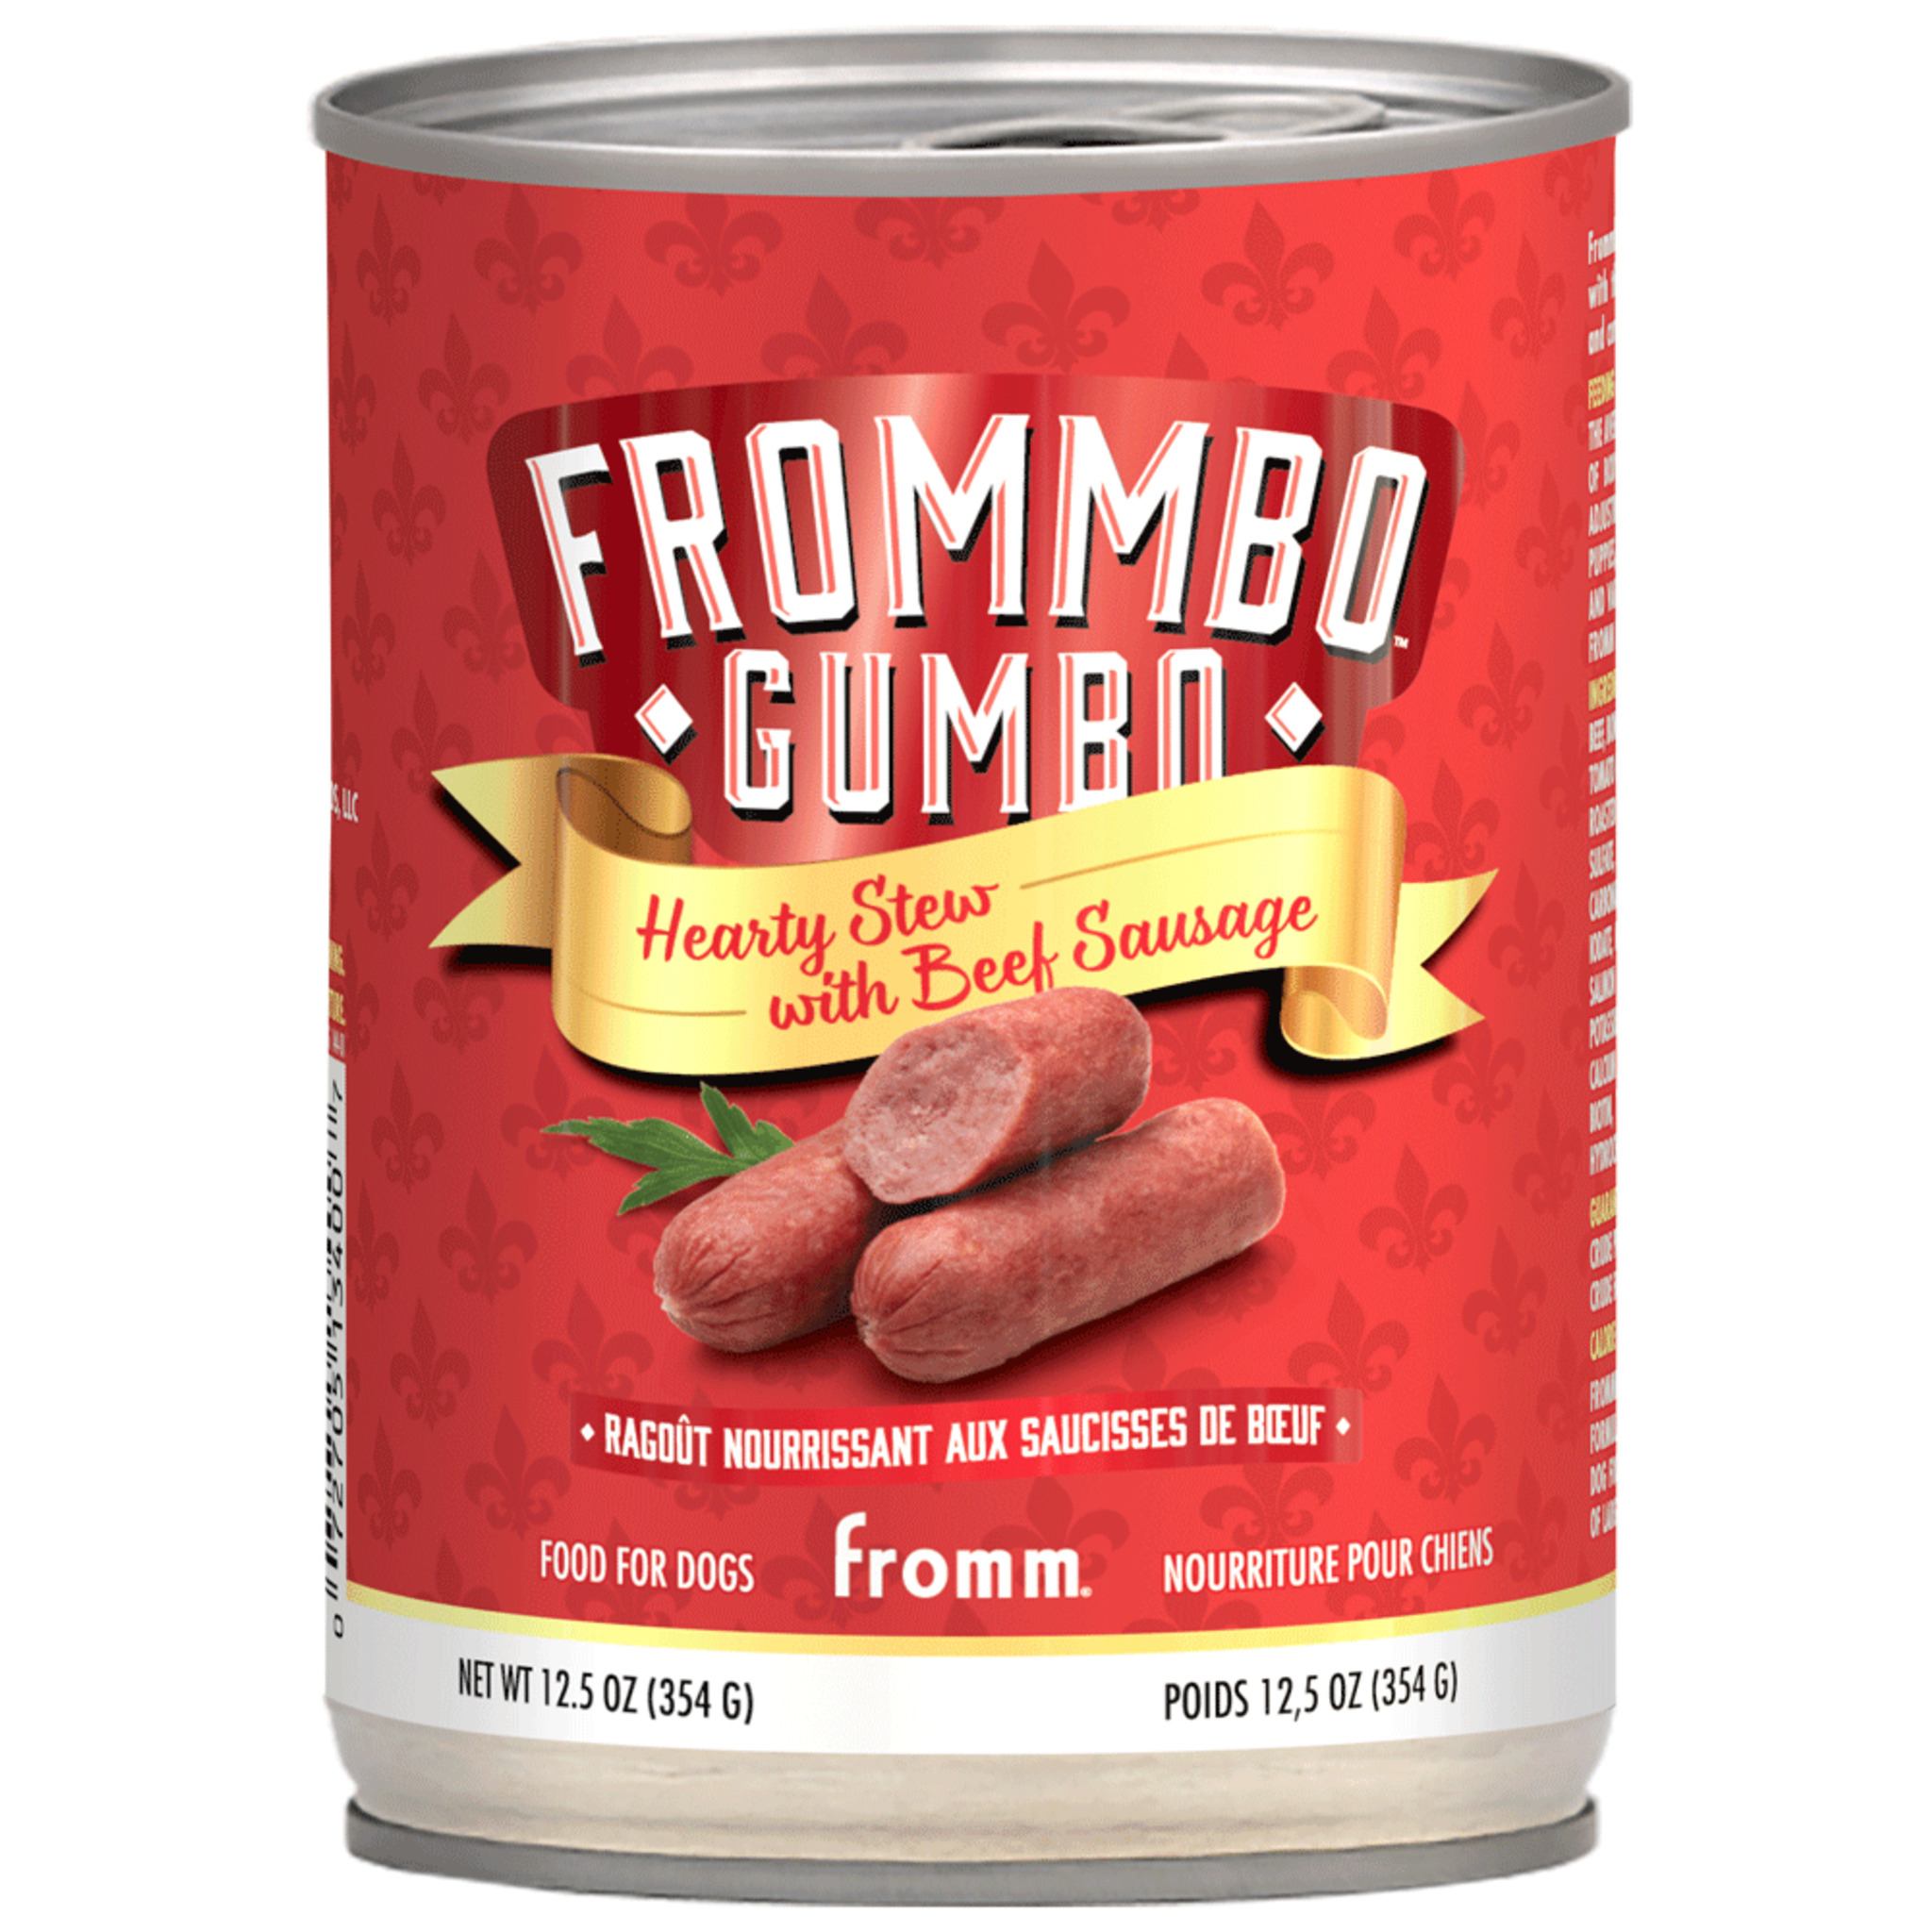 Fromm Frommbo Gumbo Beef Sausage Stew Dog Food 12.5 oz